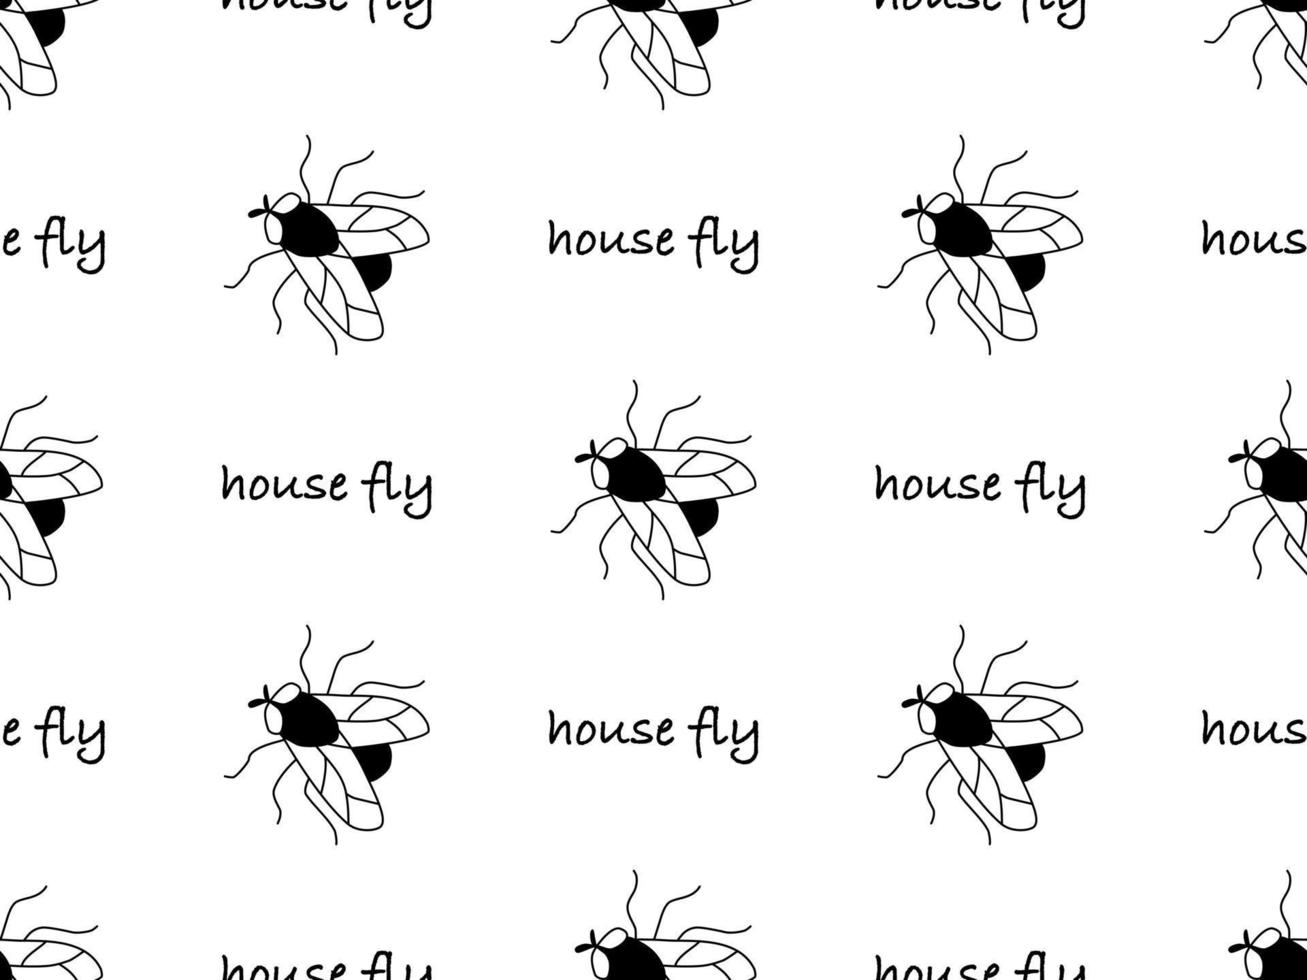 Housefly cartoon character seamless pattern on white background vector